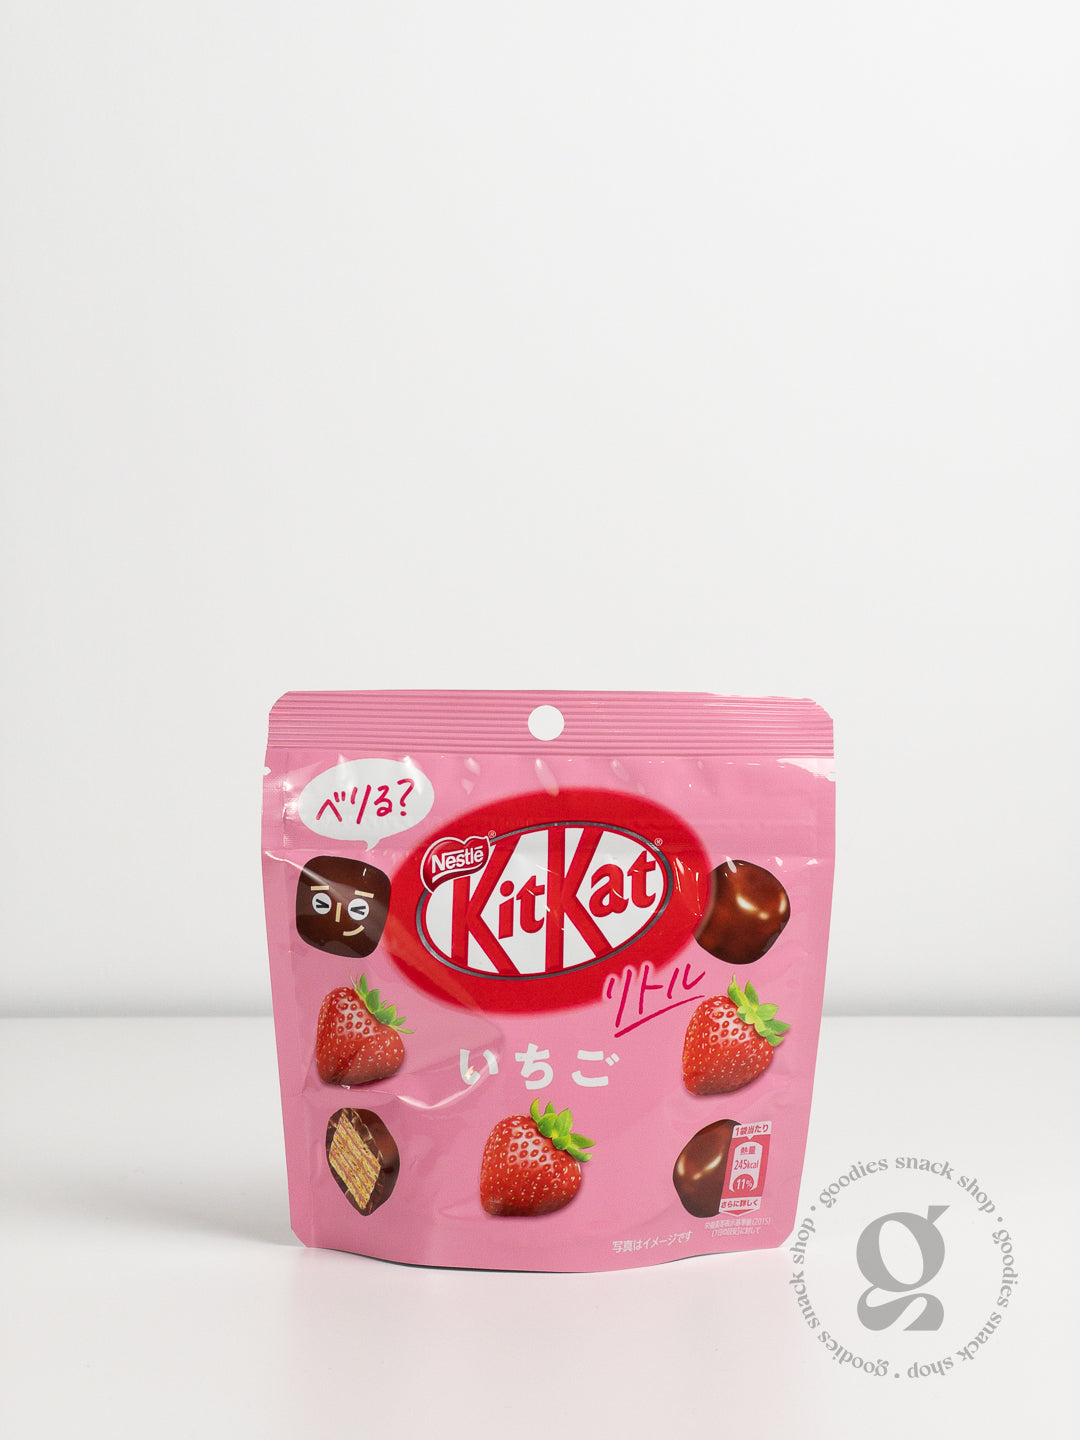 KitKat - Strawberry Biscuits in Chocolate - Japan